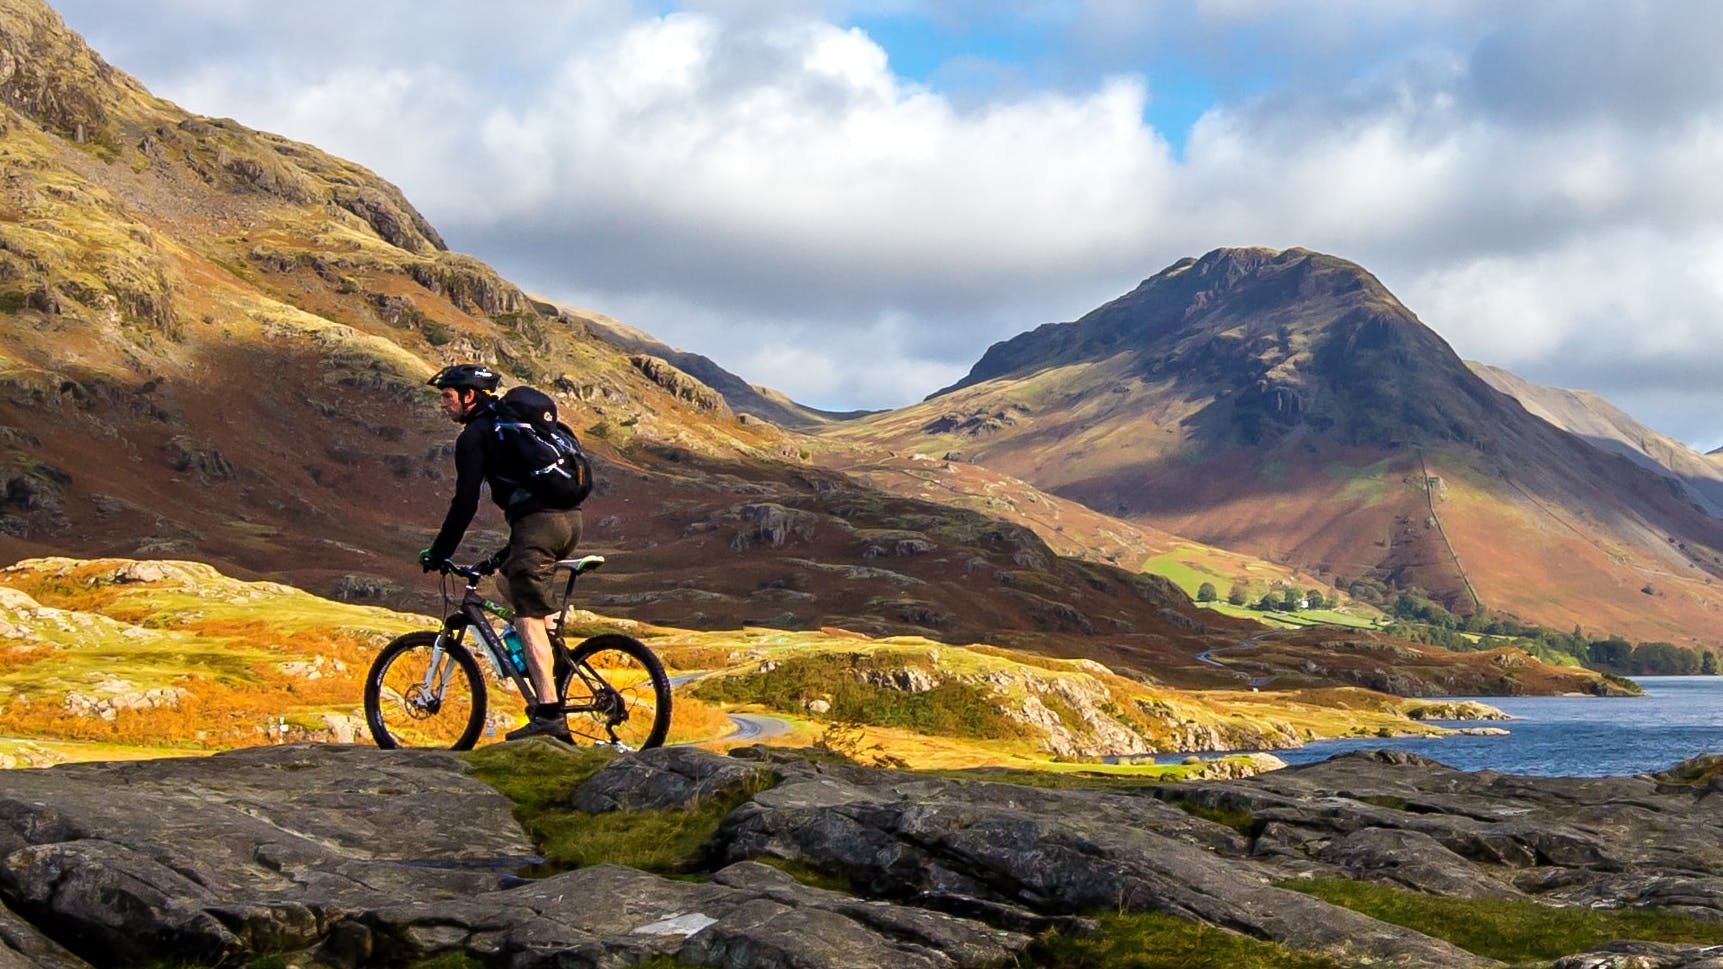 A man on a mountain bike rests among rolling hills and mountains